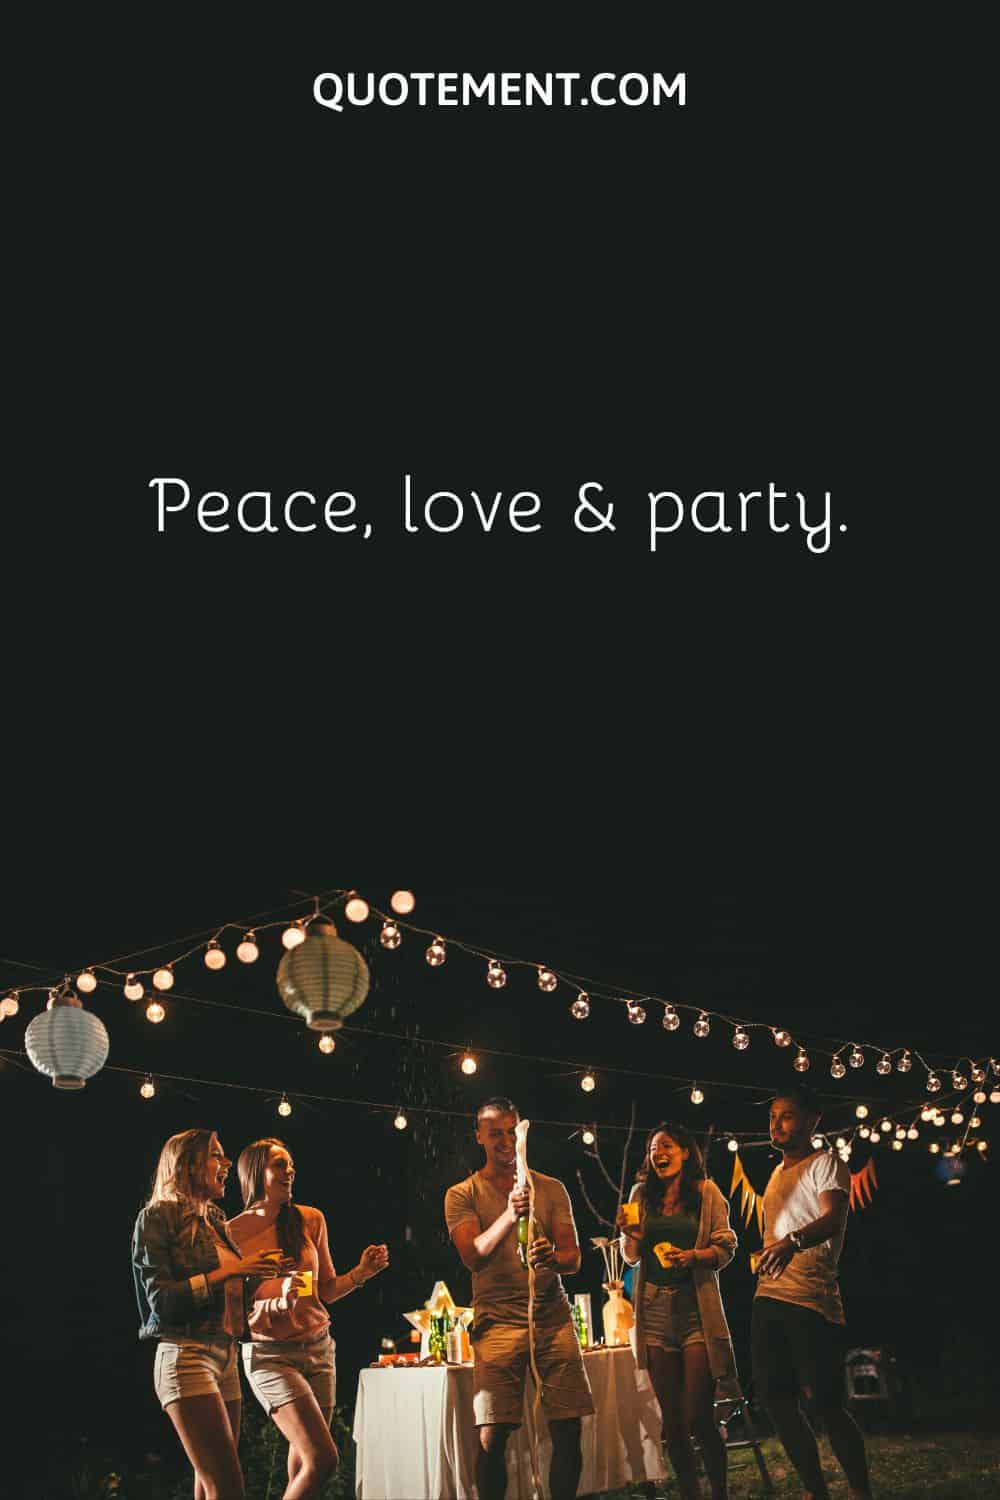 Peace, love & party